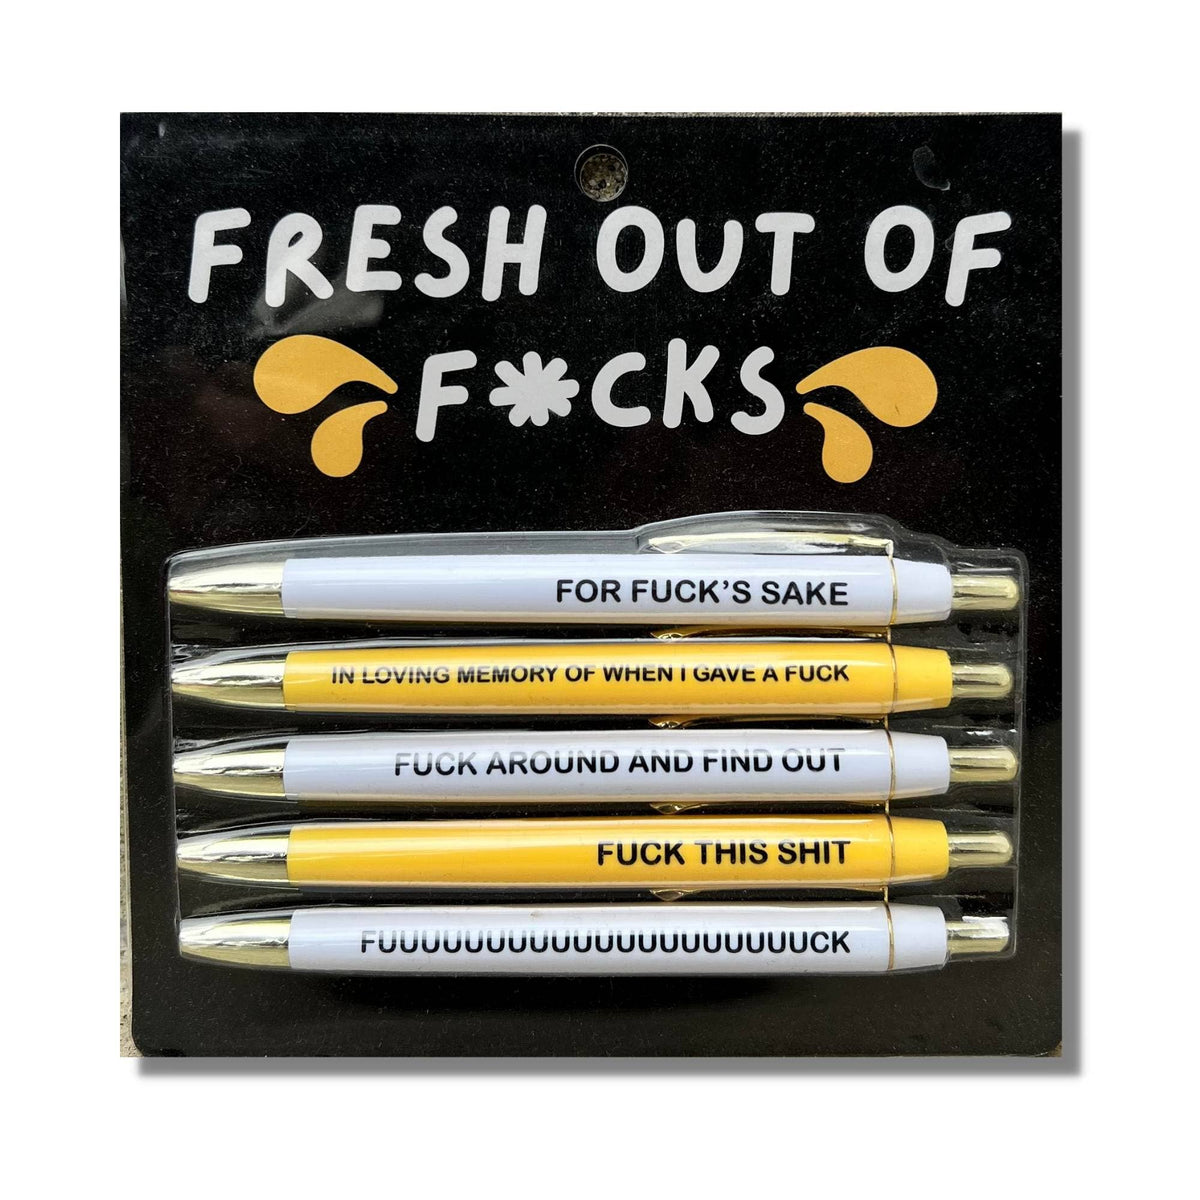 Welcome to the Shit Show Pen Set funny 